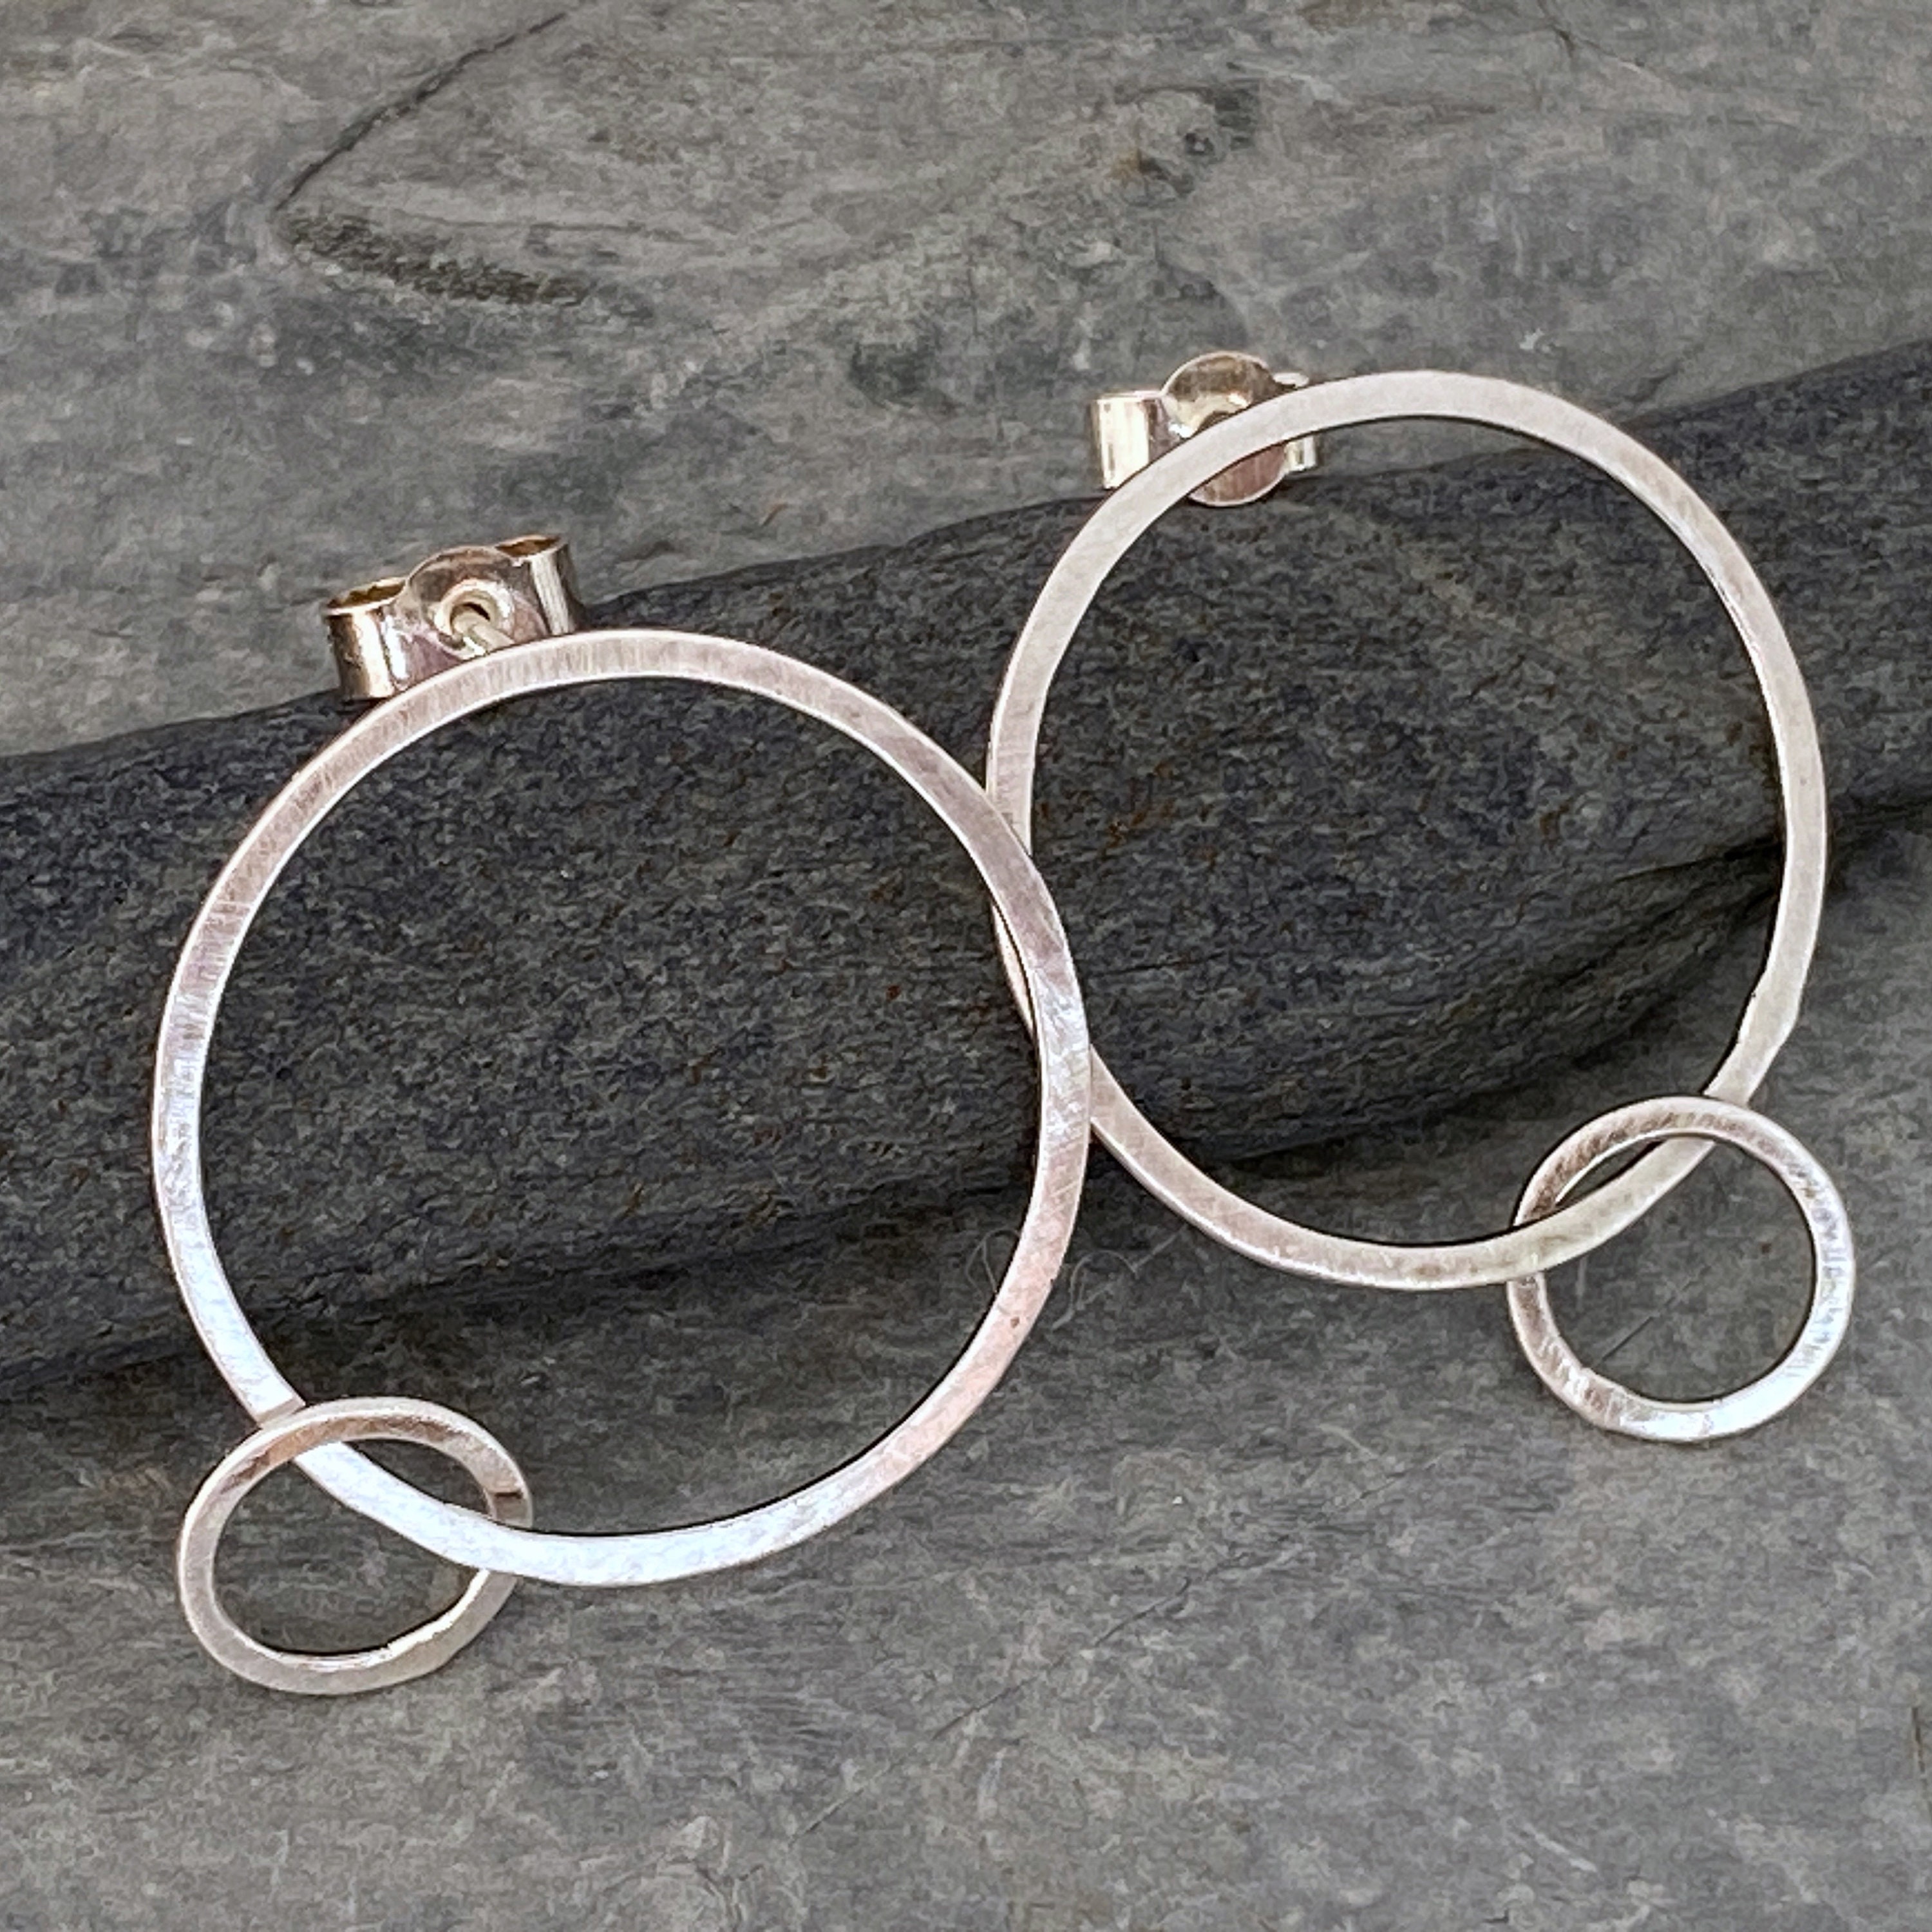 Large Silver Hoop Earrings With A Matt Brushed Finish Or Sparkly Hammered Finish. Round Stud Small Ring Link